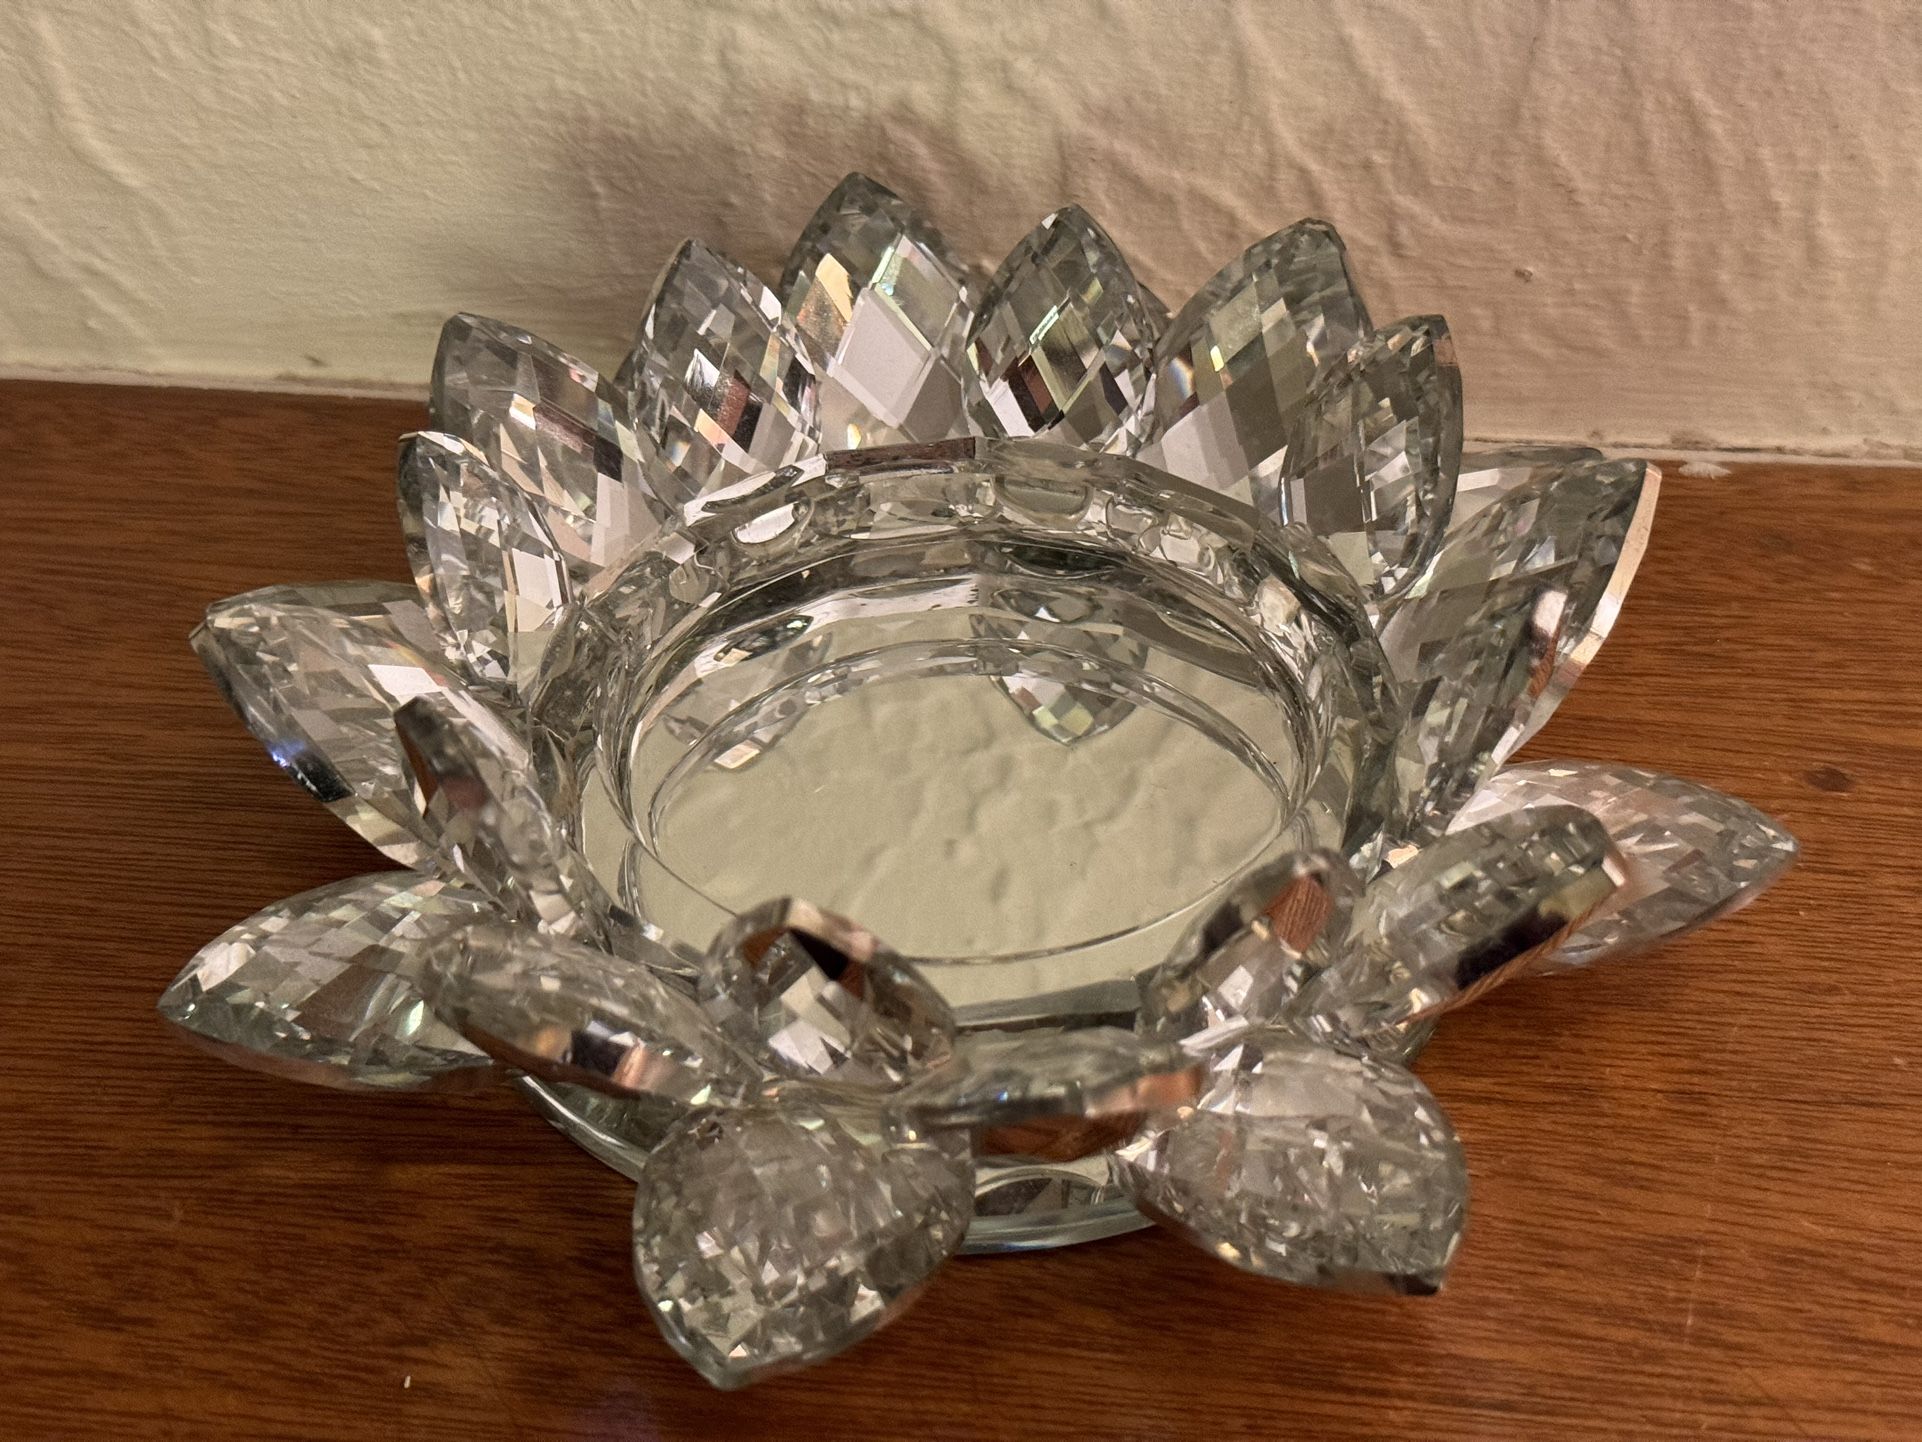 10” mirrored faceted glass lotus holder by Valerie.